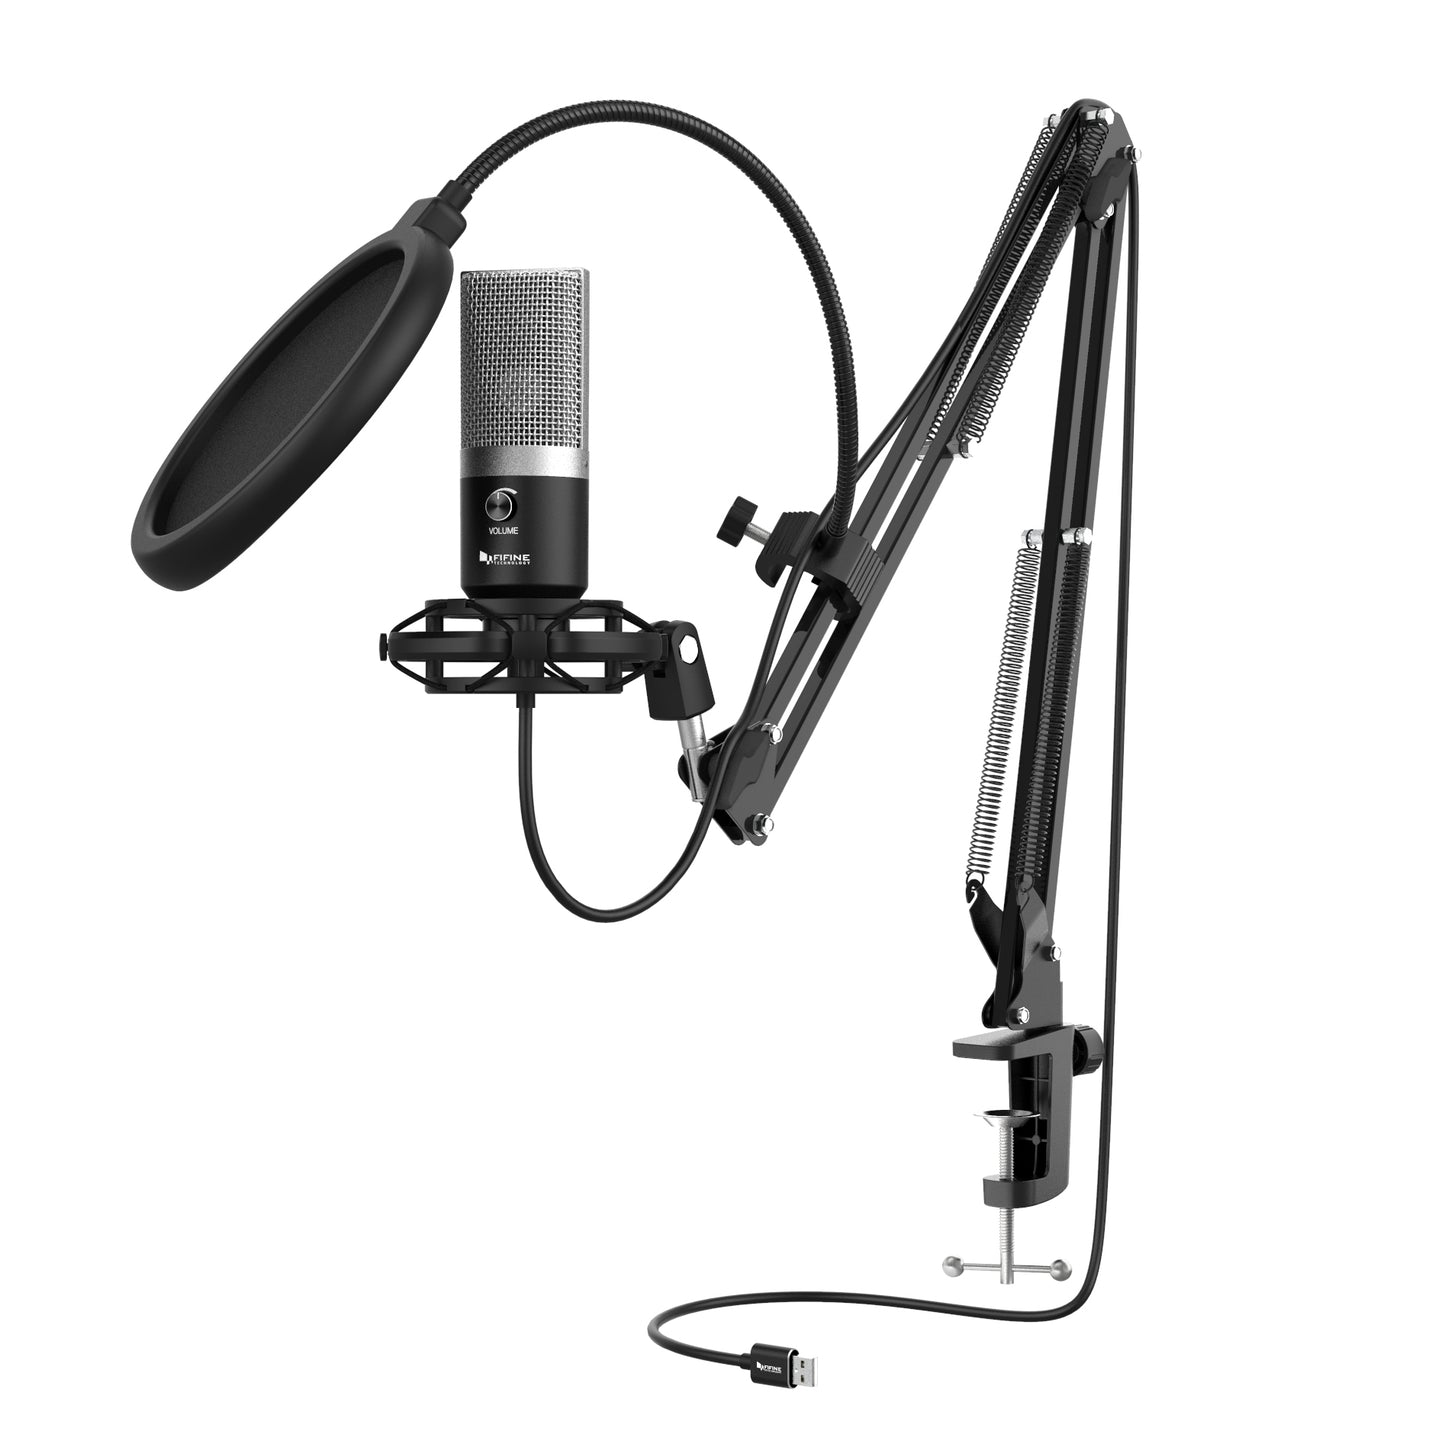 FIFINE T670 USB Studio Microphone Condenser for Gaming, Recording, Live Streaming Microphone Kit